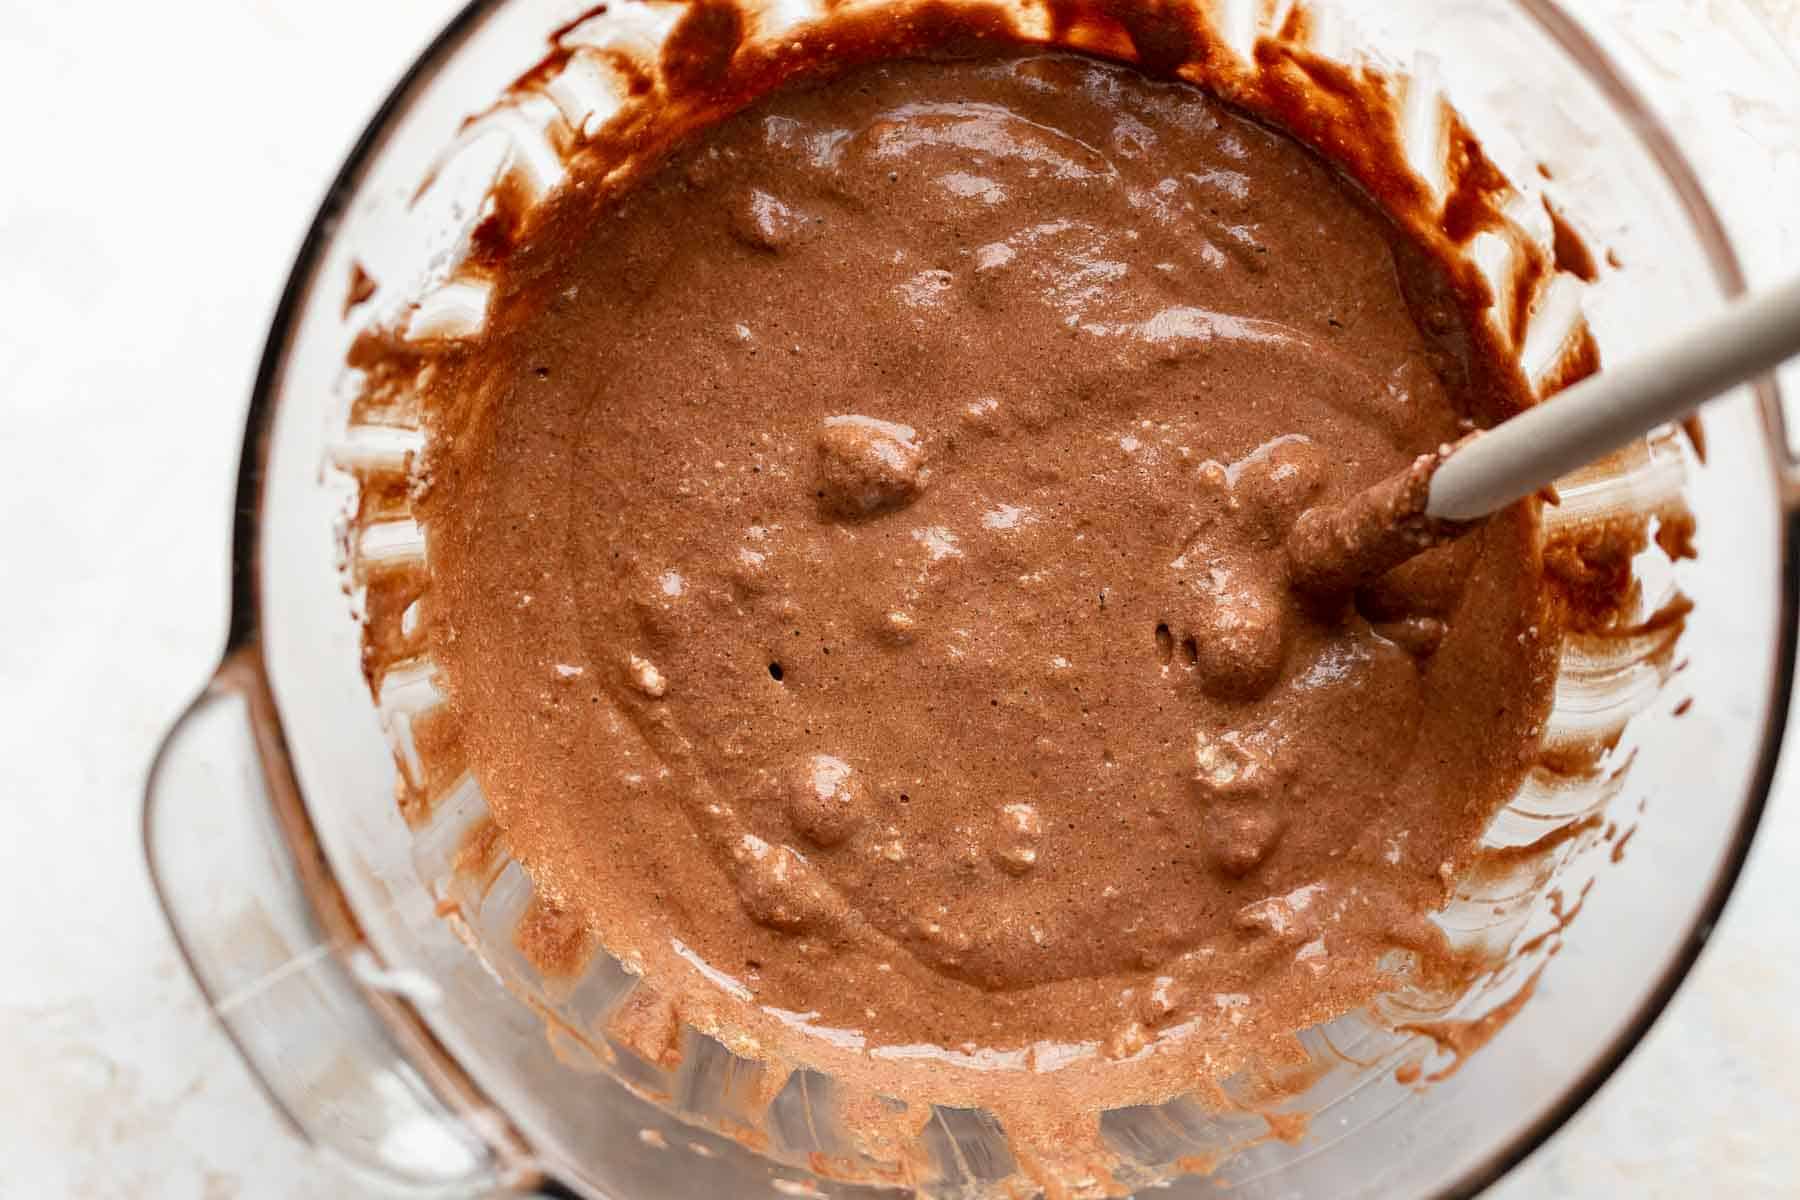 mixing chocolate batter with a wooden spoon